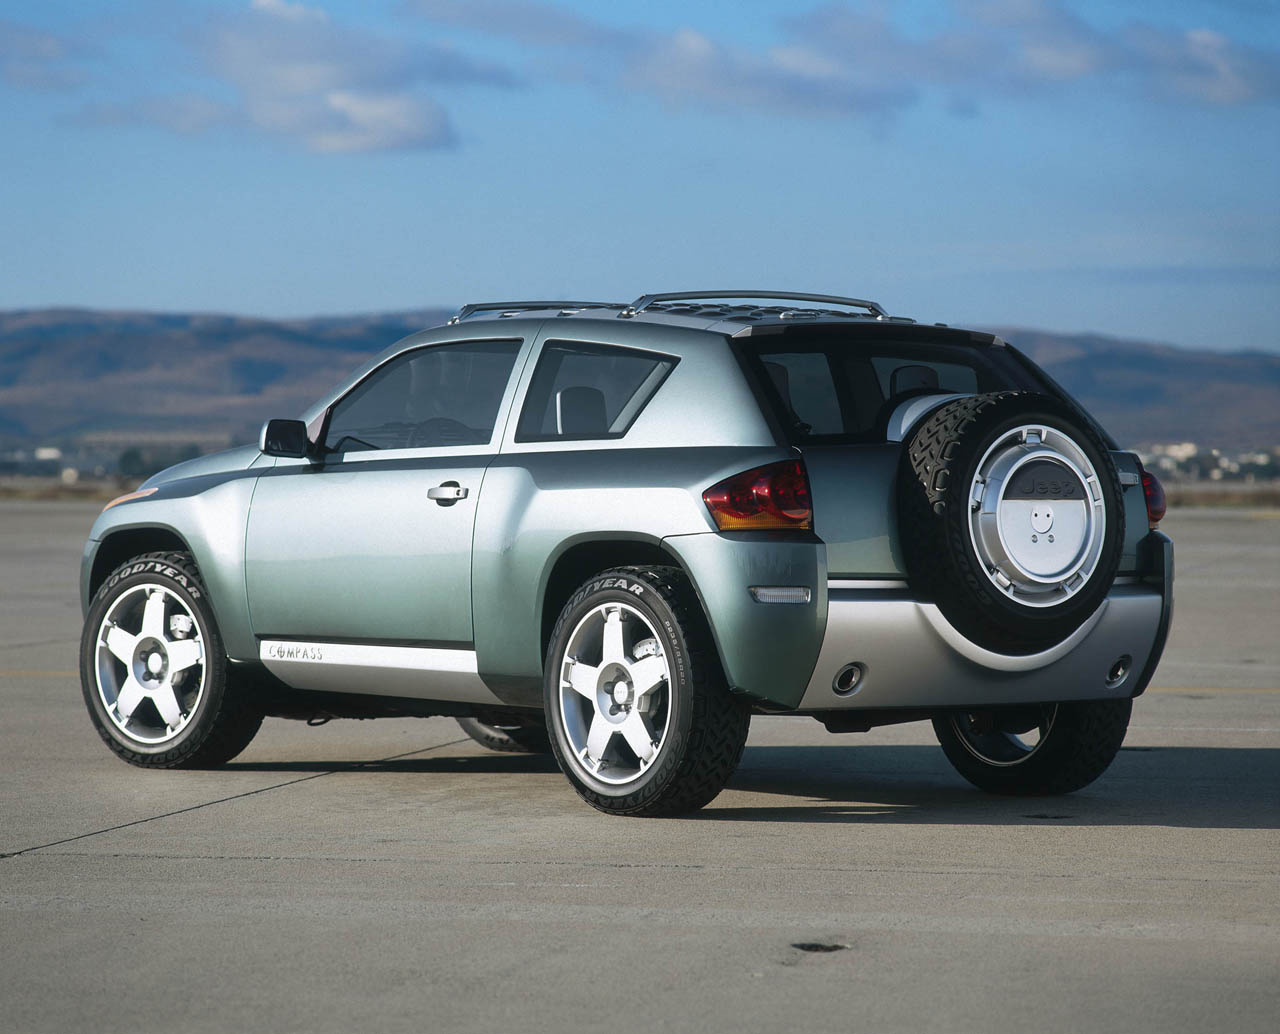 2010 Jeep compass consumer reviews #4